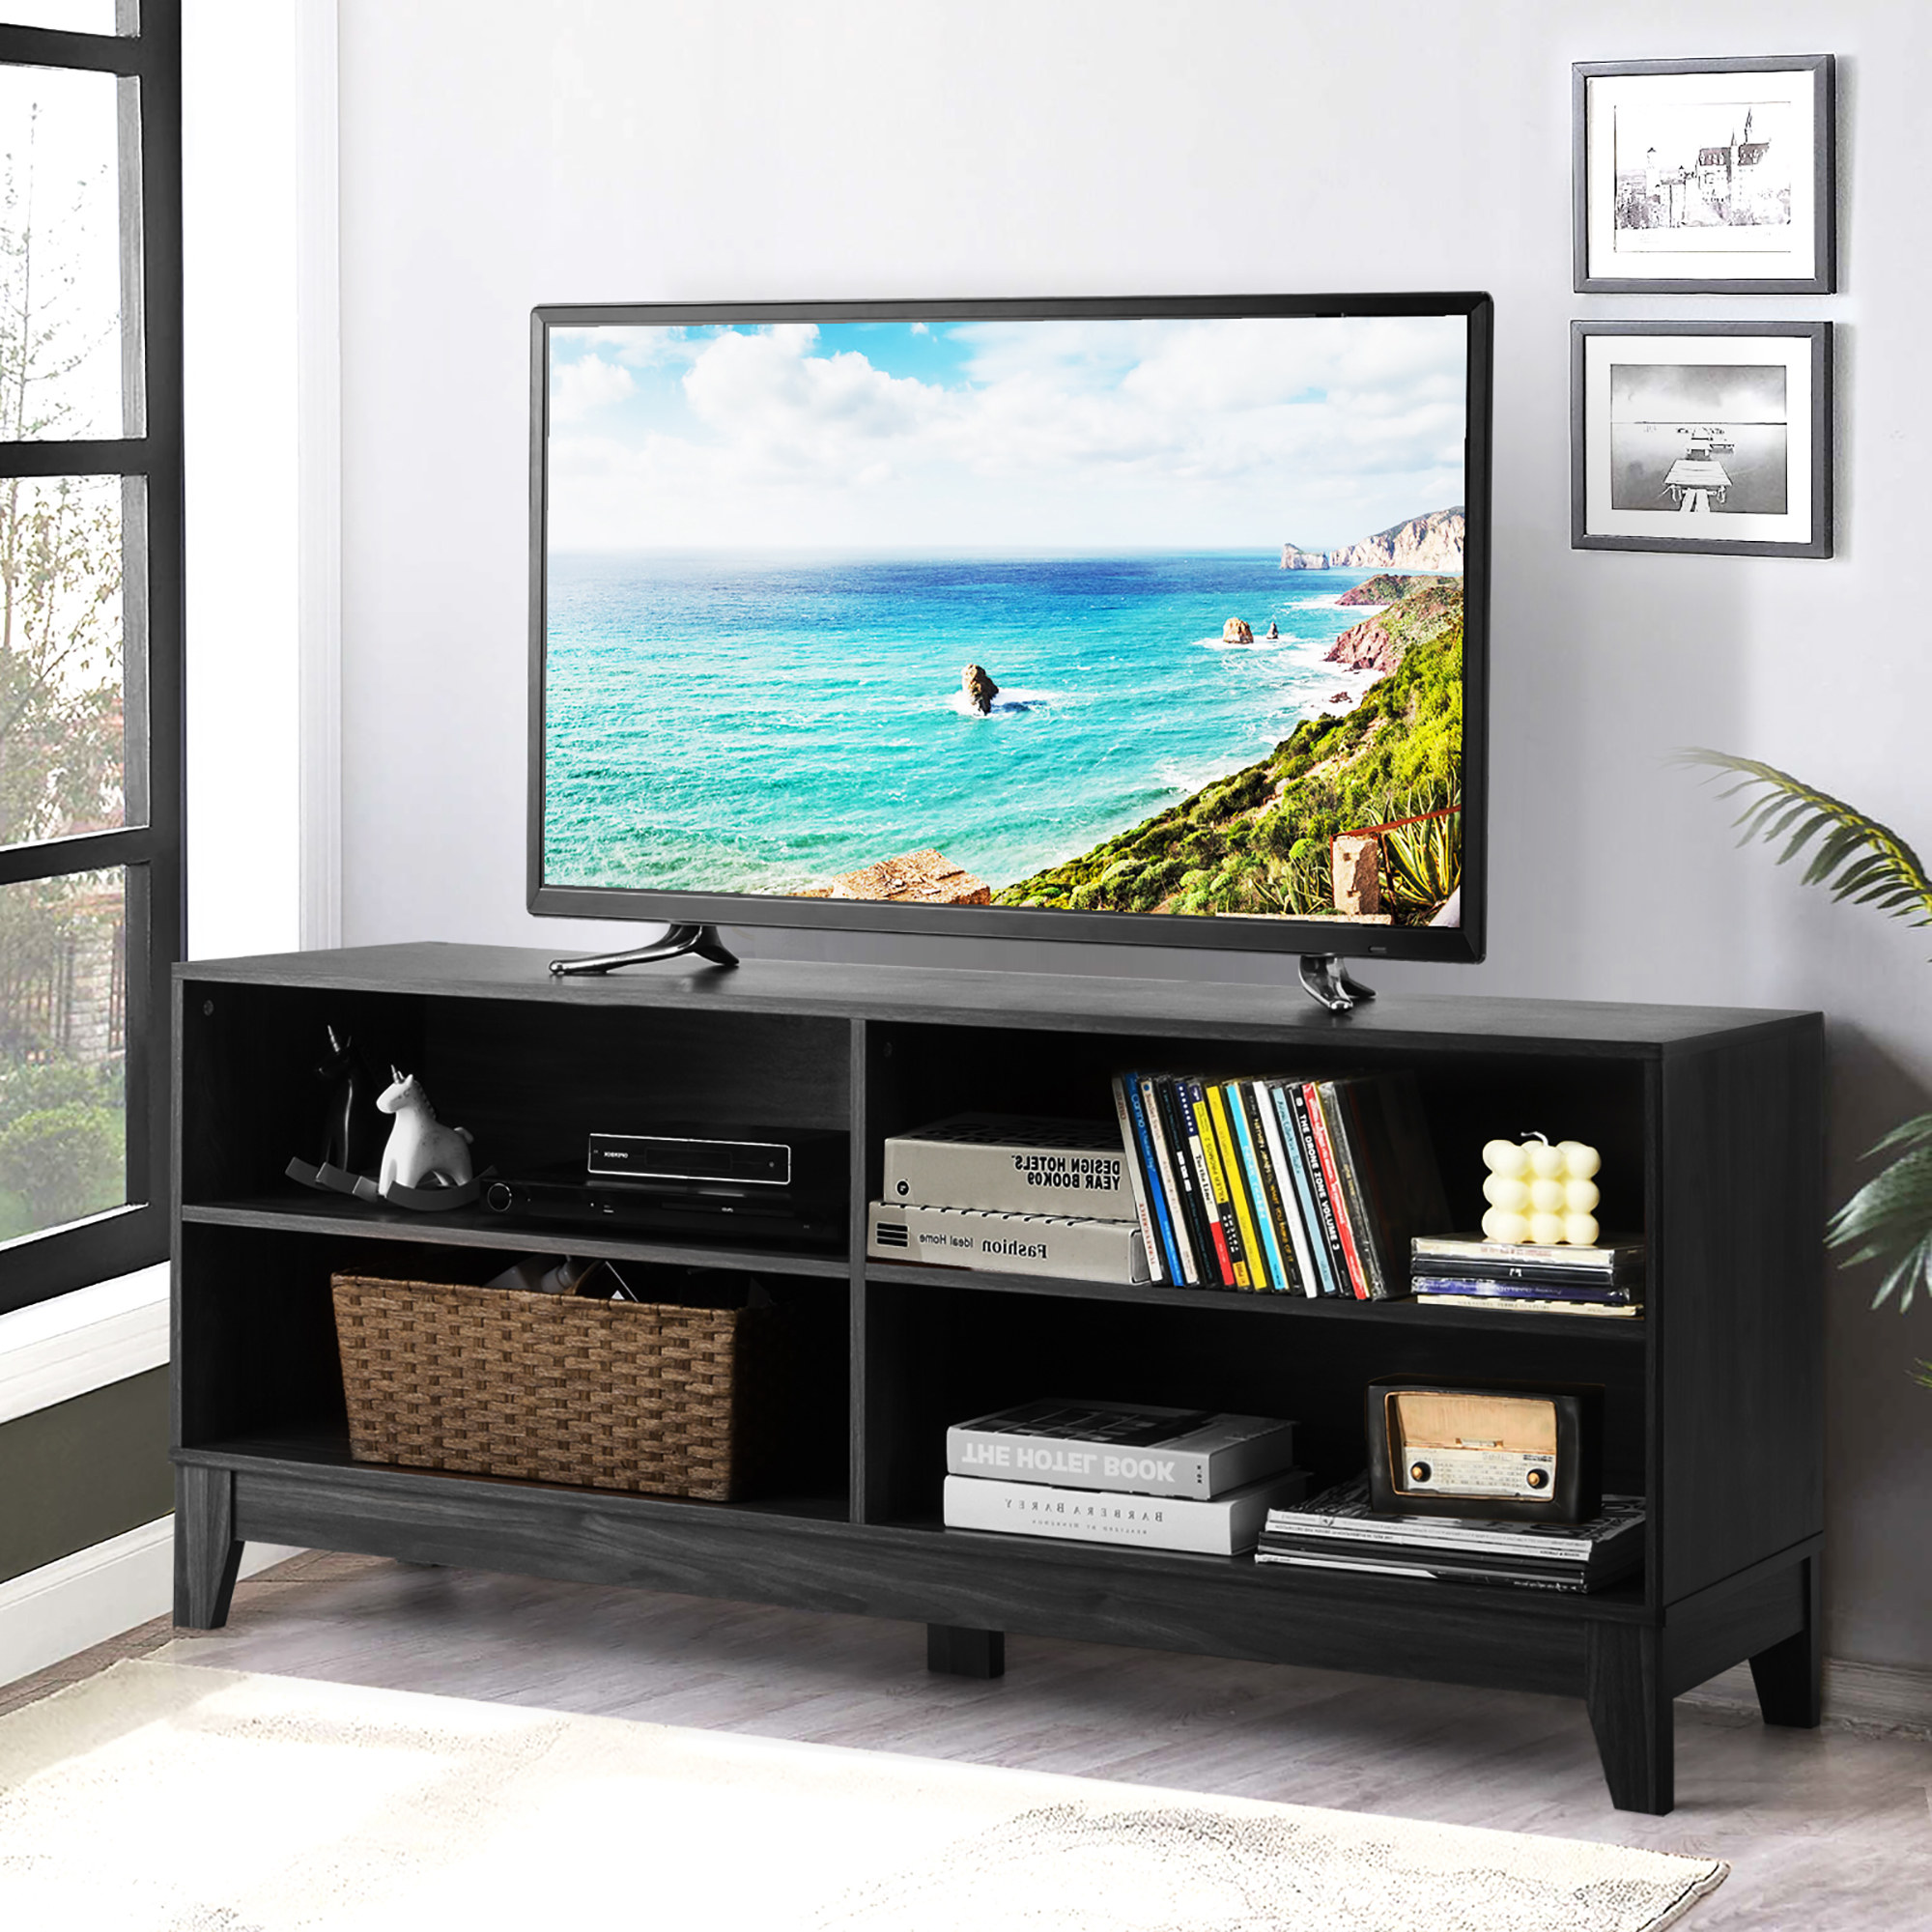 Costway 58'' Modern Wood TV Stand Console Storage Entertainment Media Center Black - image 2 of 10